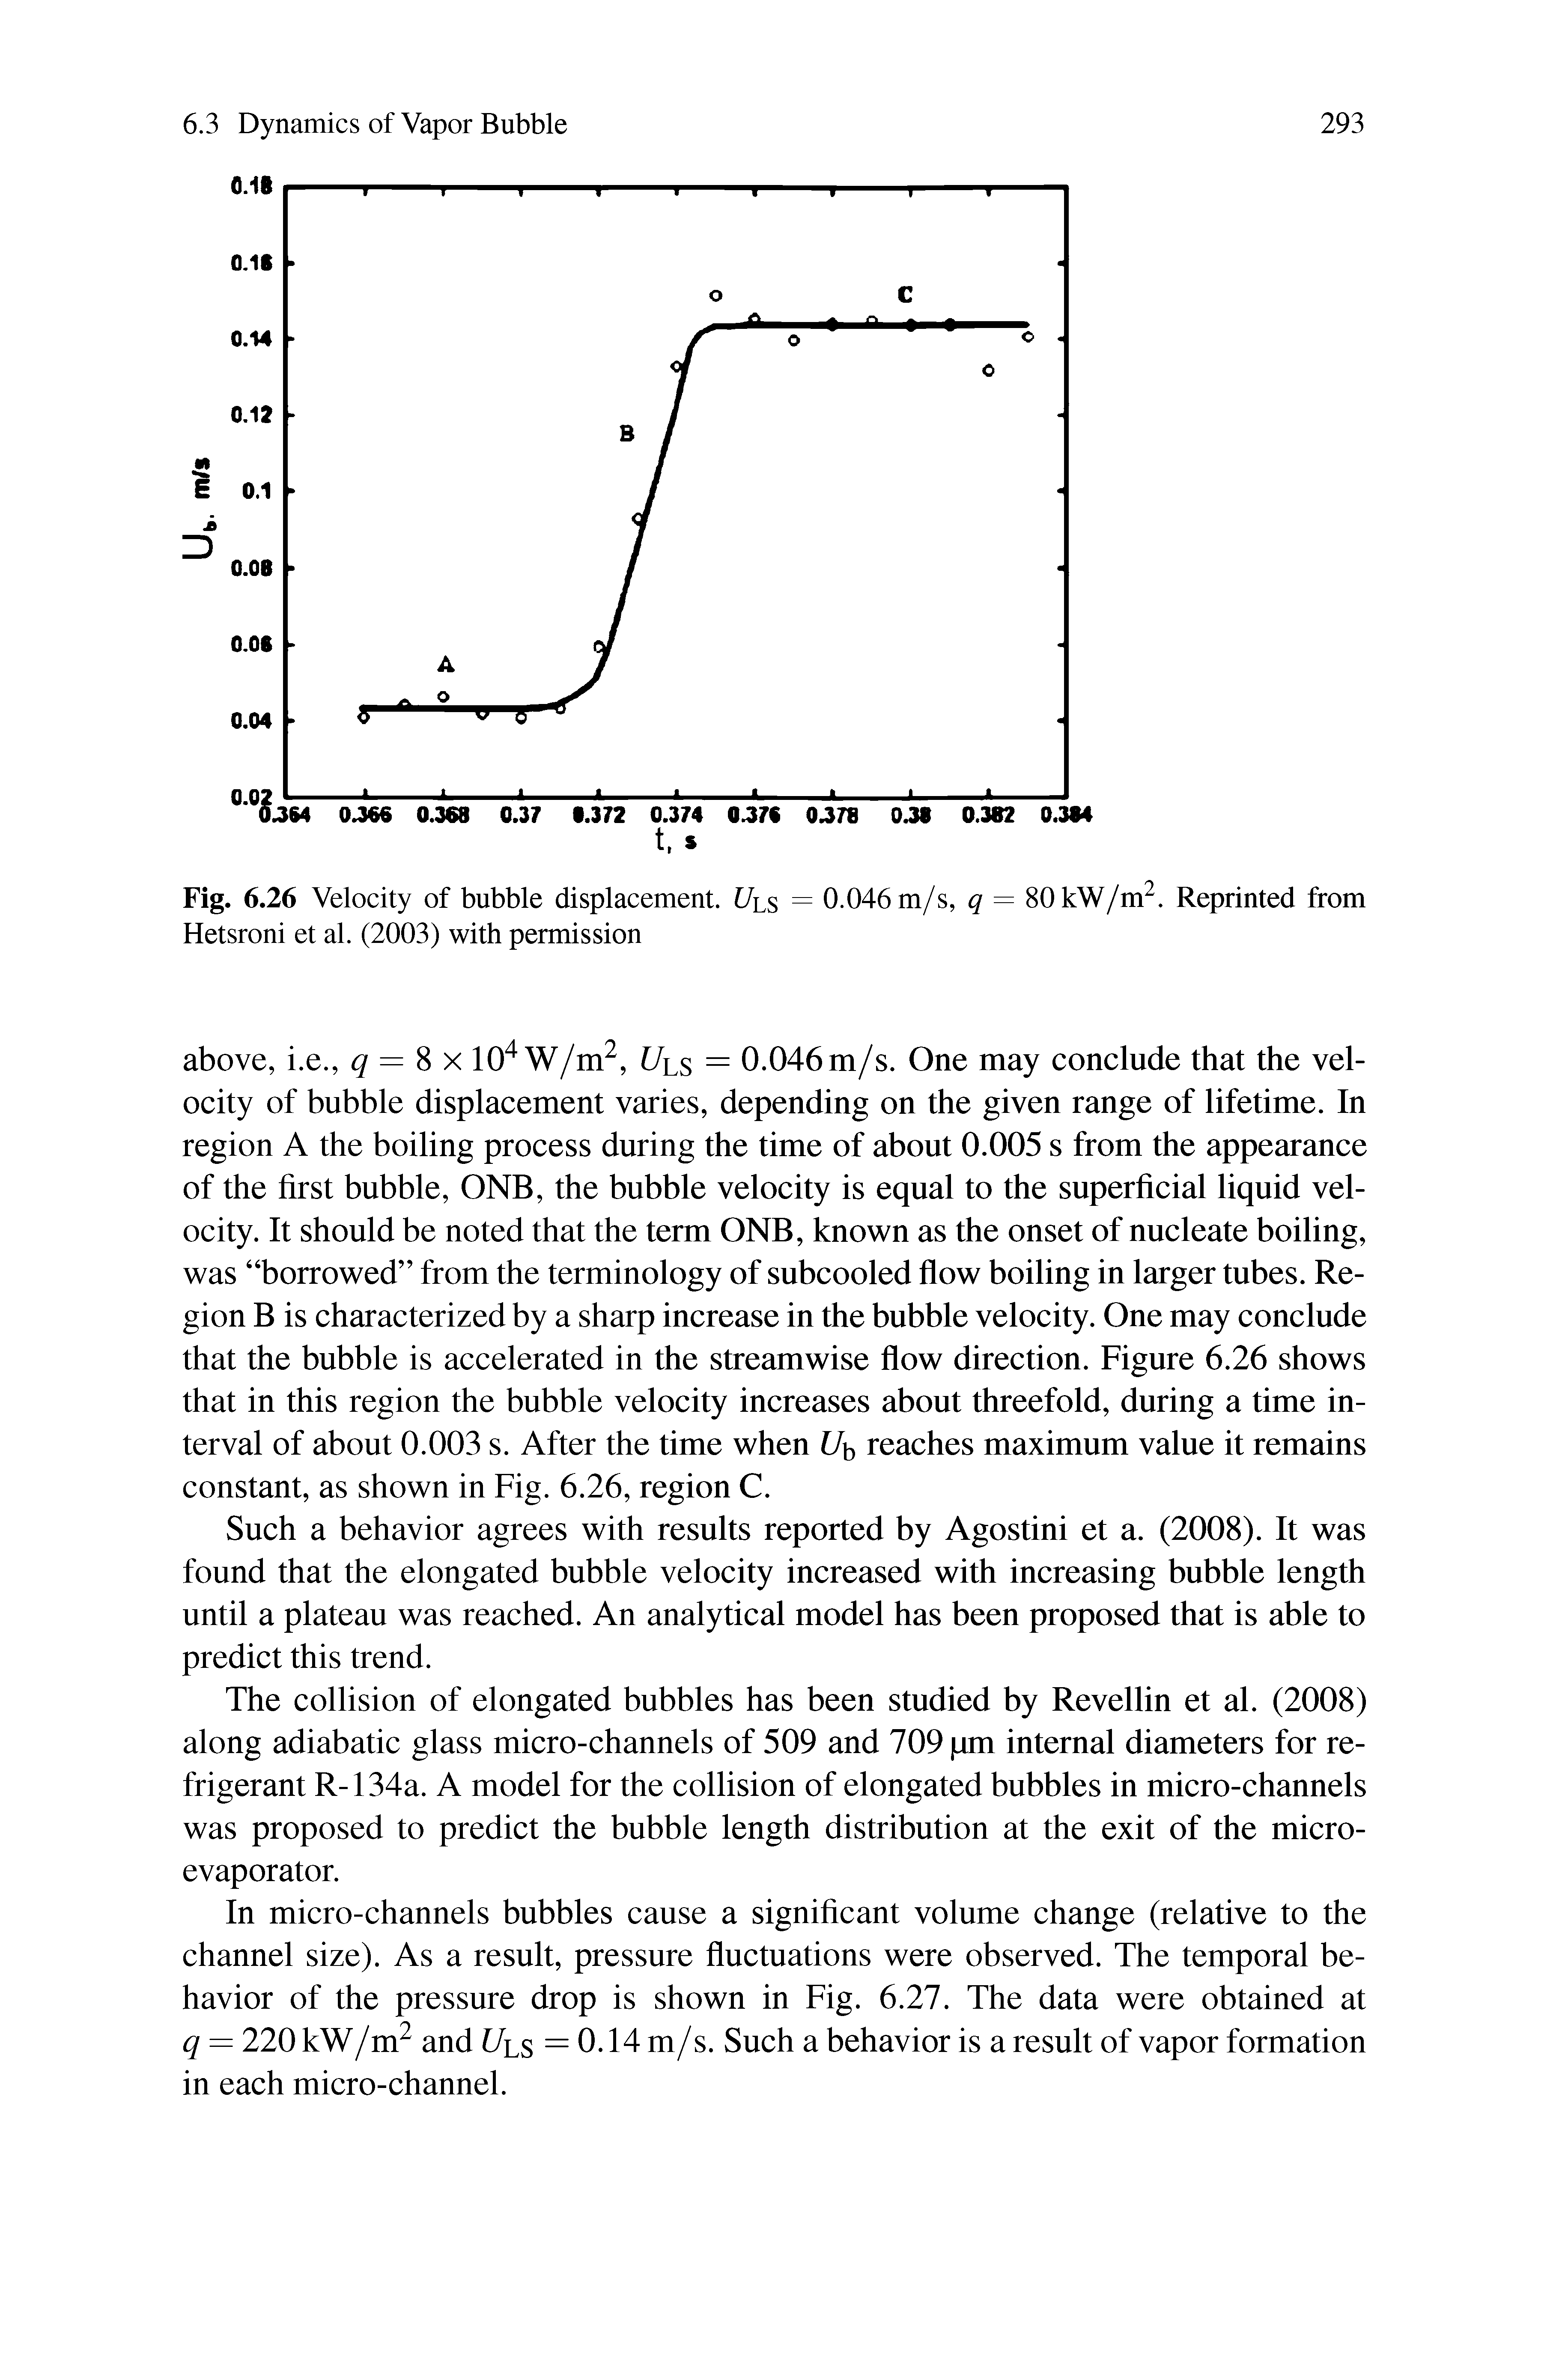 Fig. 6.26 Velocity of bubble displacement. C/ls = 0.046 m/s, q = 80kW/m. Reprinted from Hetsroni et al. (2003) with permission...